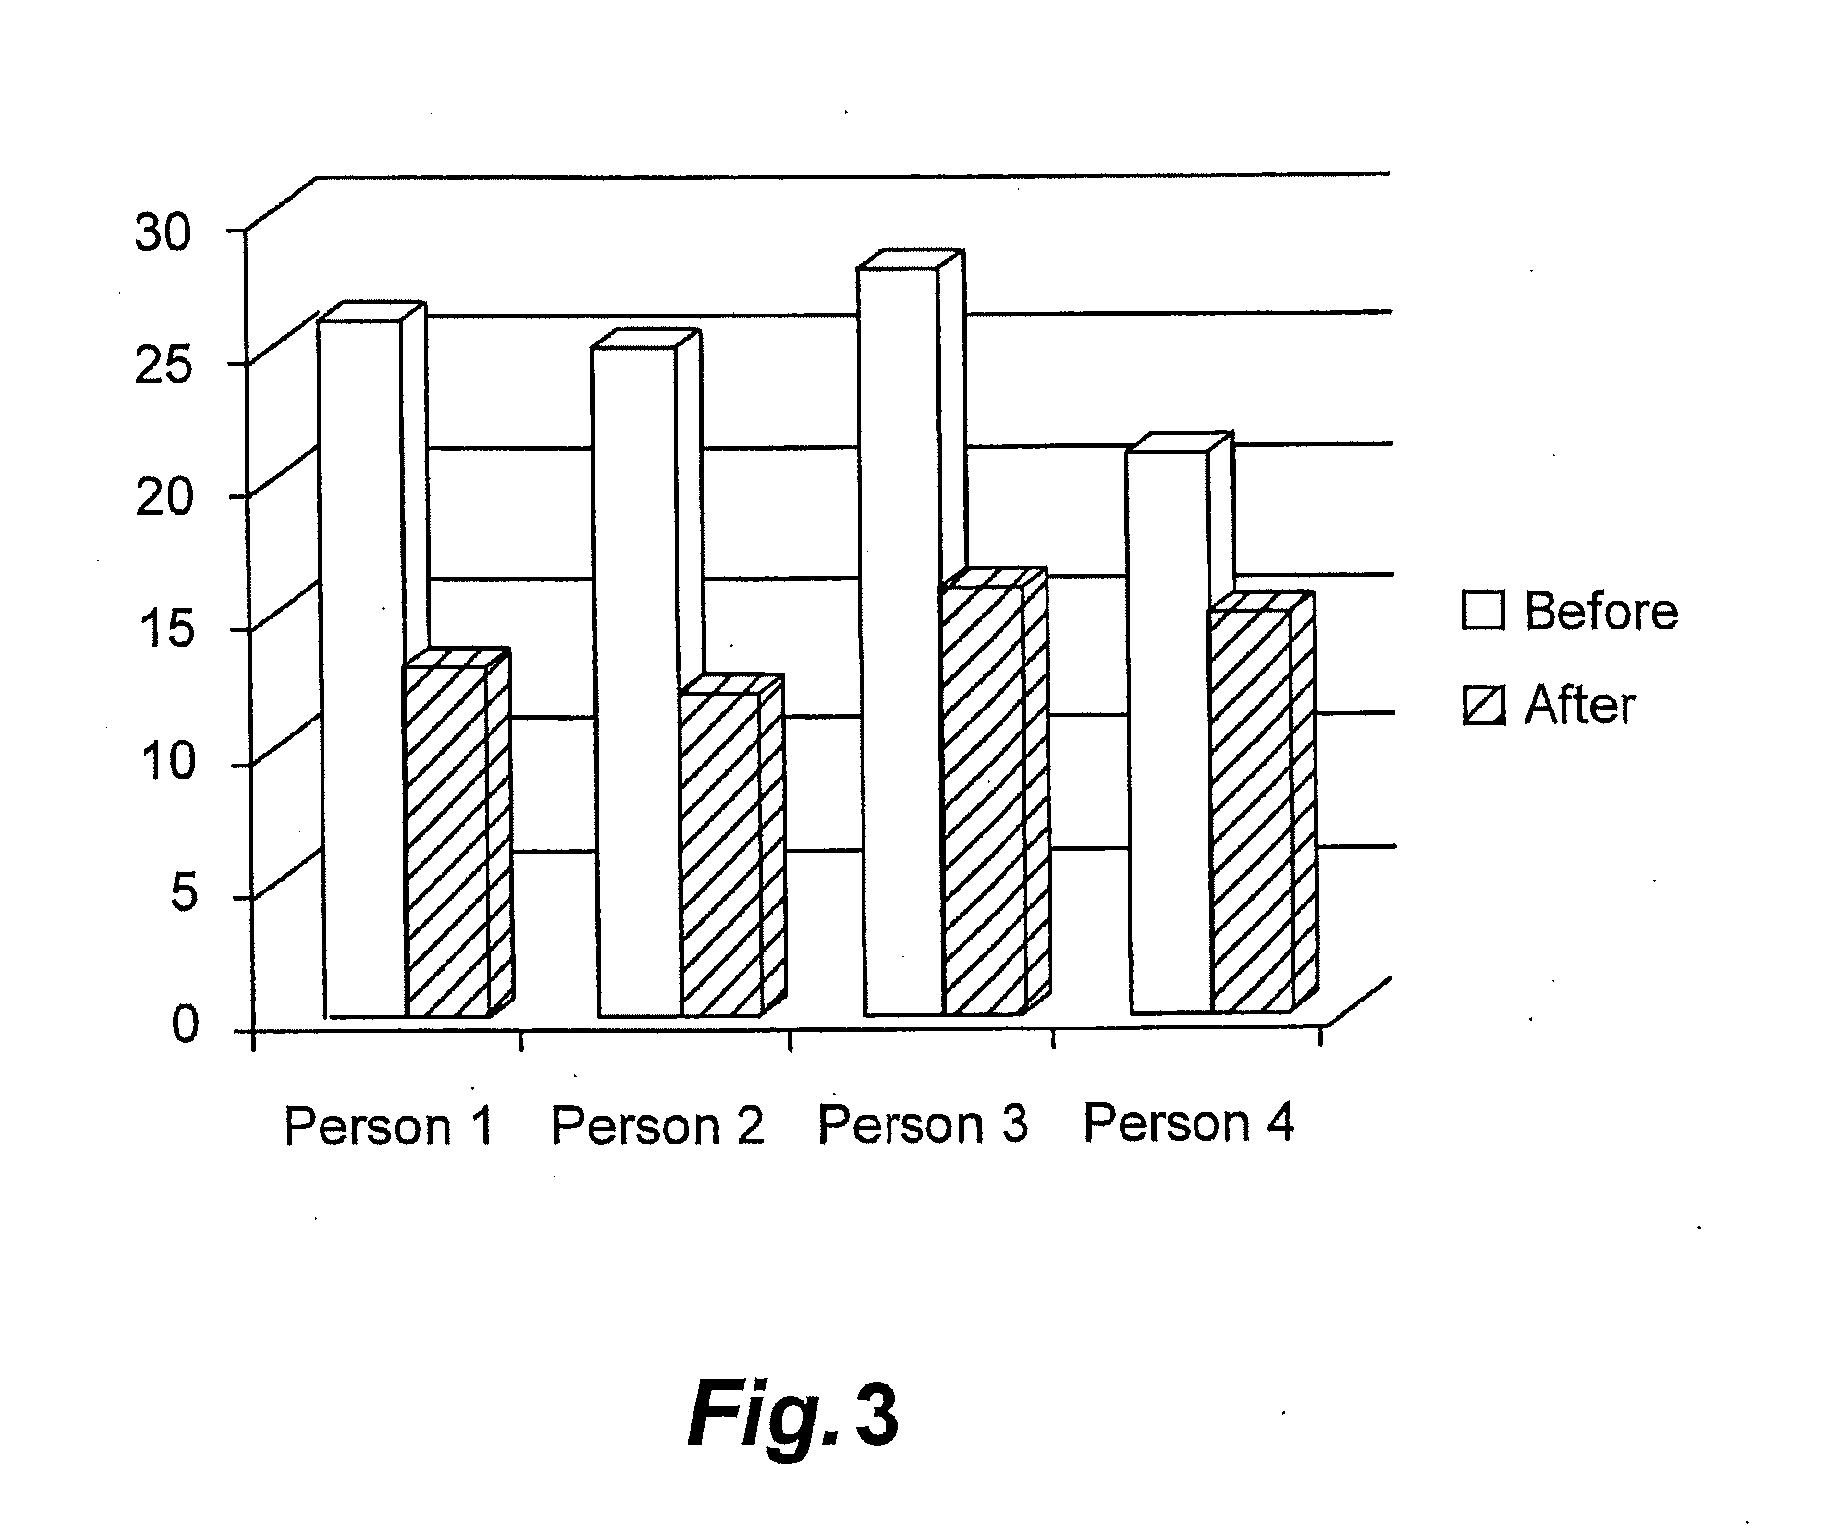 Method and System for Preventing Virus-Related Obesity and Obesity Related Diseases